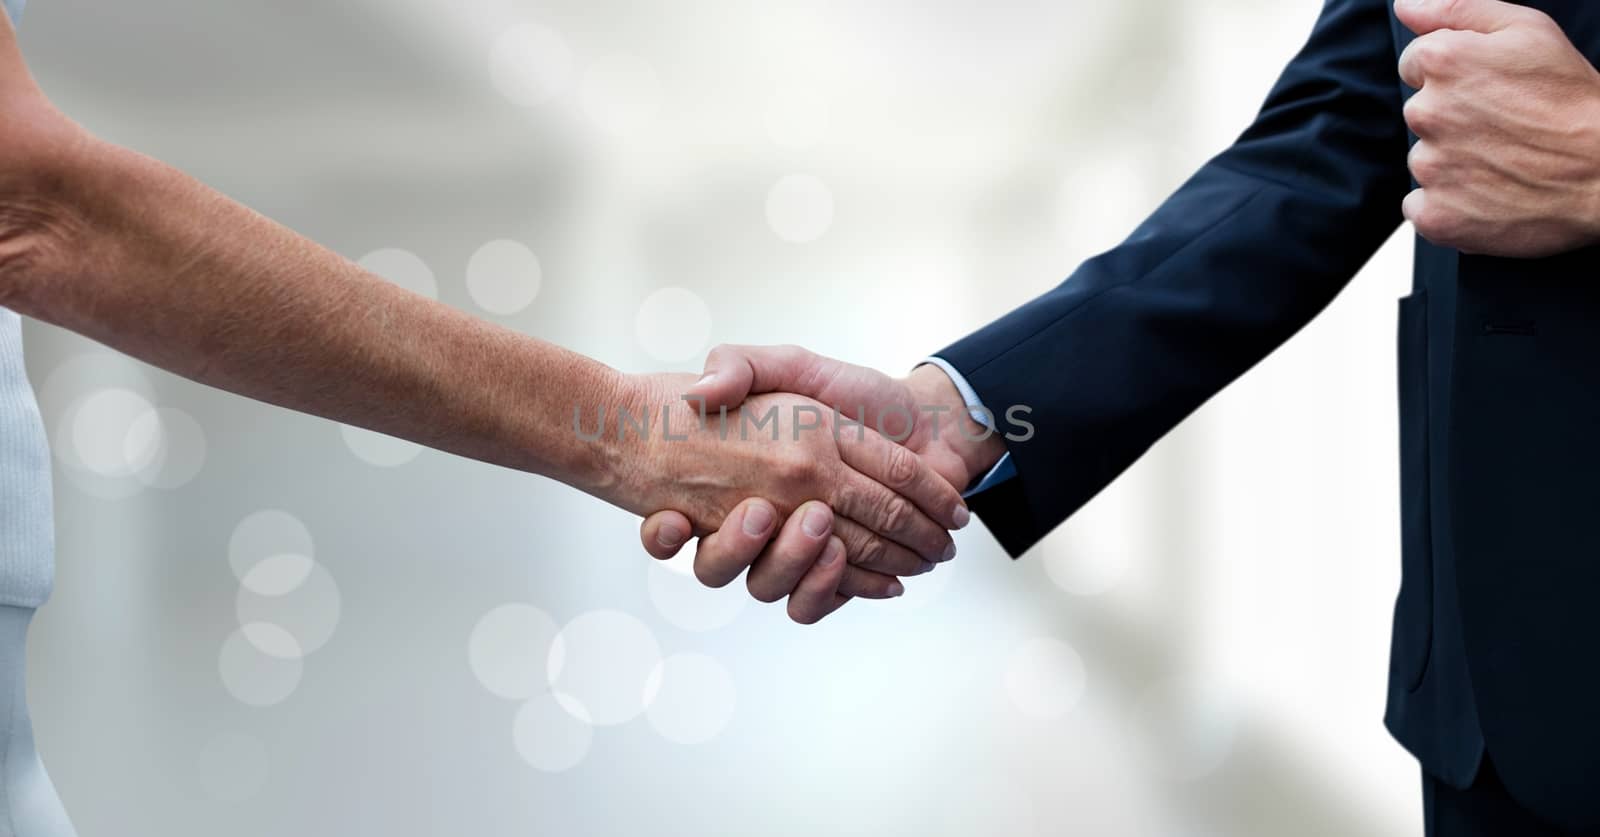 Business people shaking hands against blurred background by Wavebreakmedia